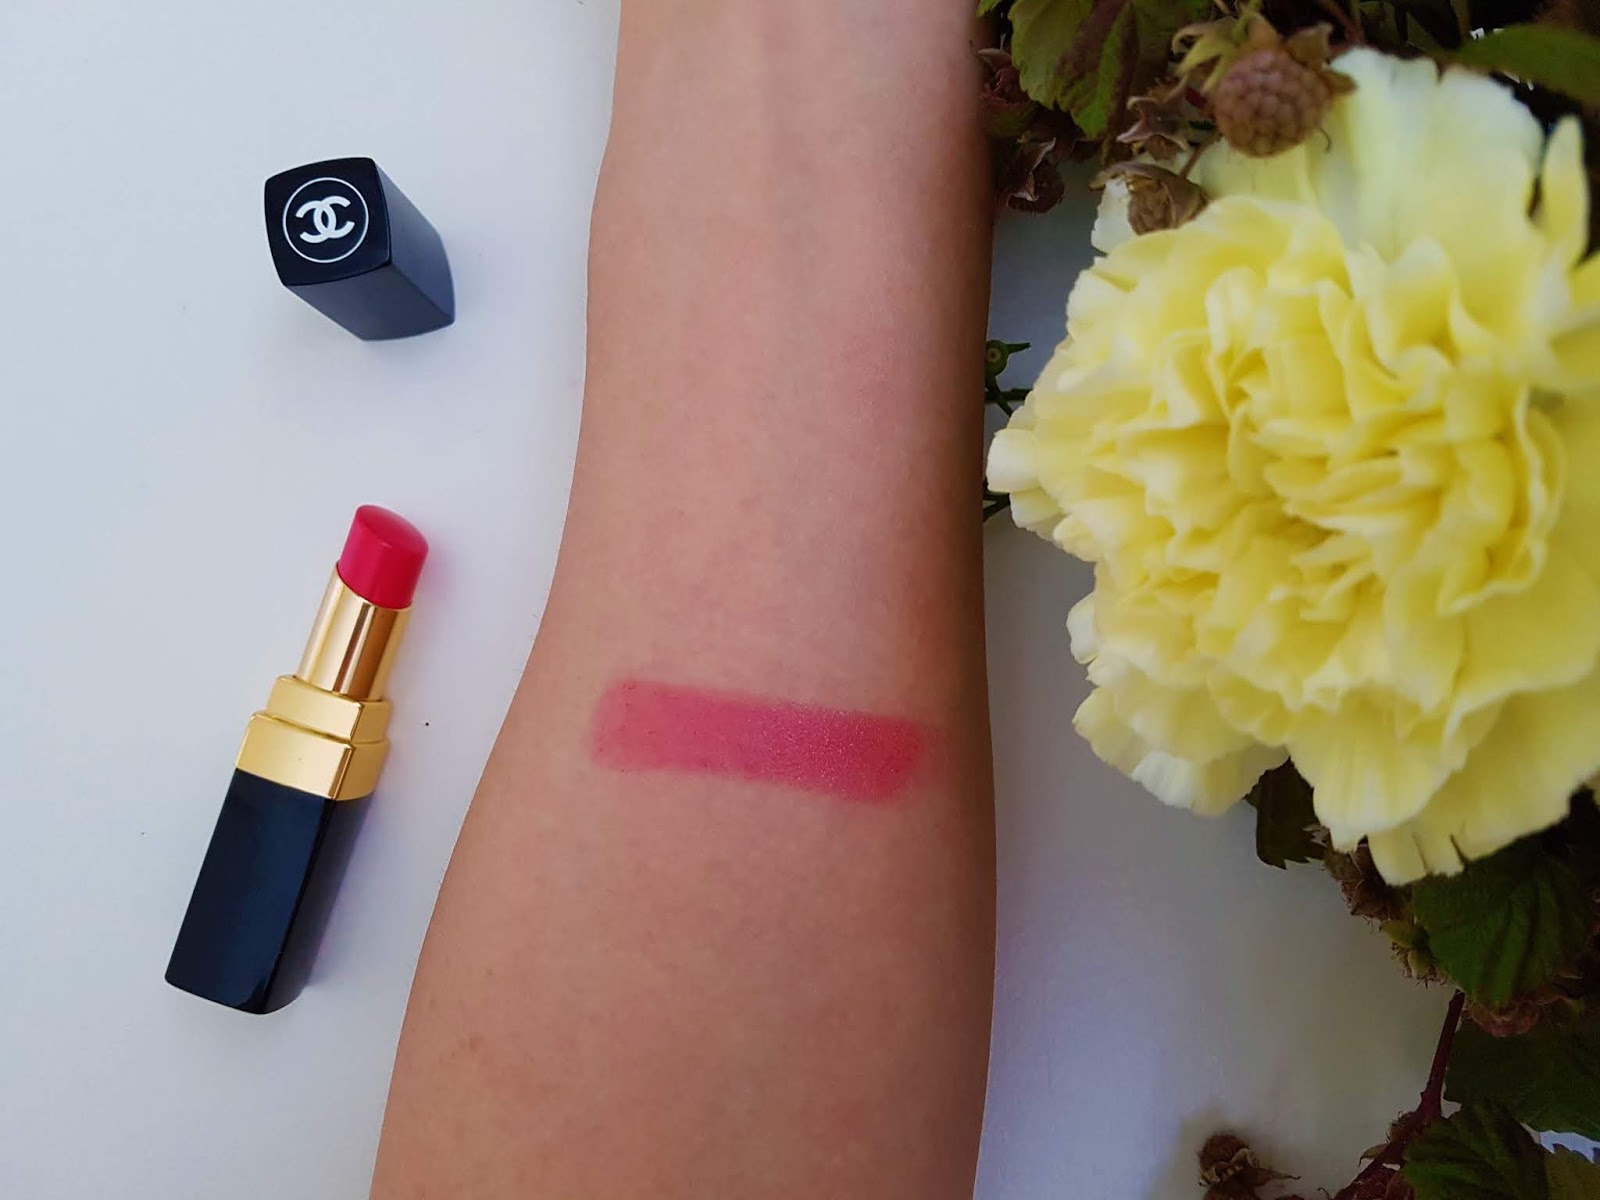 THE EXCLUSIVE BEAUTY DIARY : CHANEL ROUGE COCO BAUME & ROUGE COCO